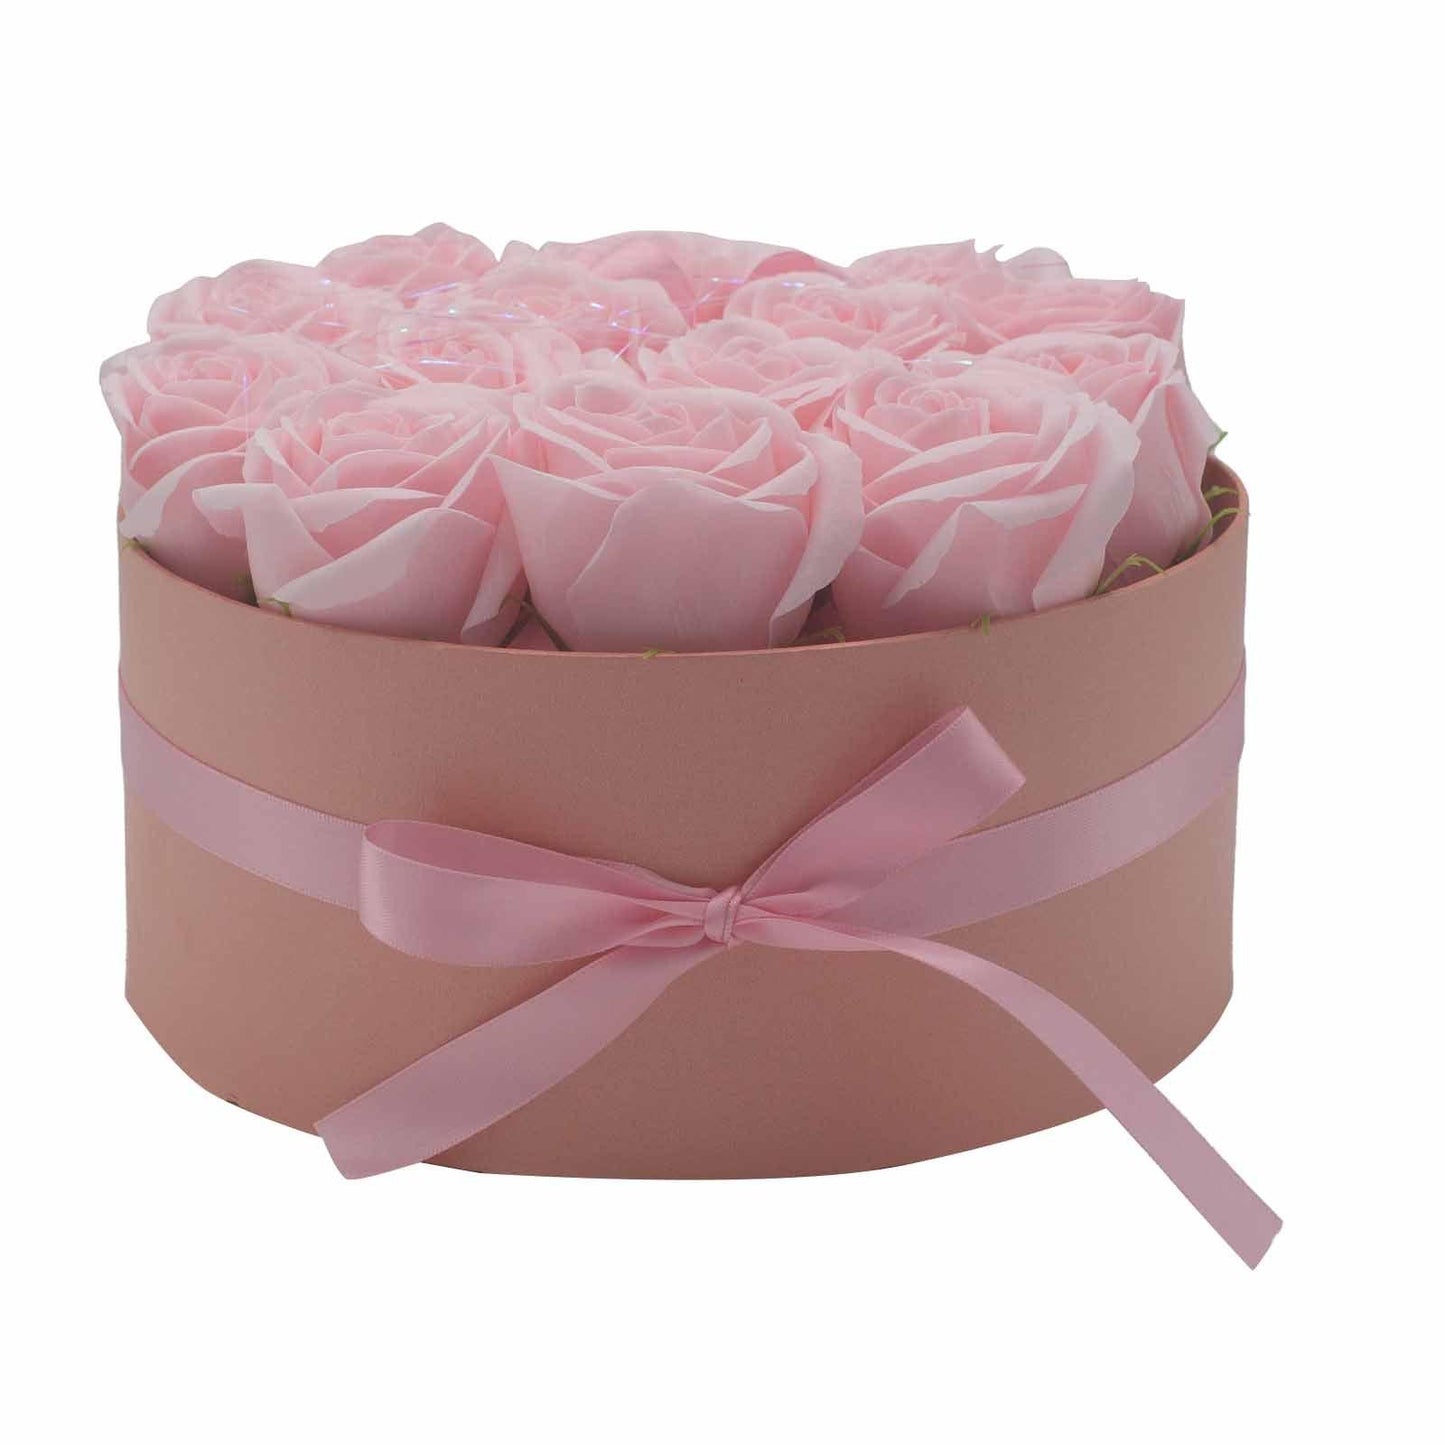 Soap Flower Gift Bouquet - 14 Pink Roses - Round - DuvetDay.co.uk